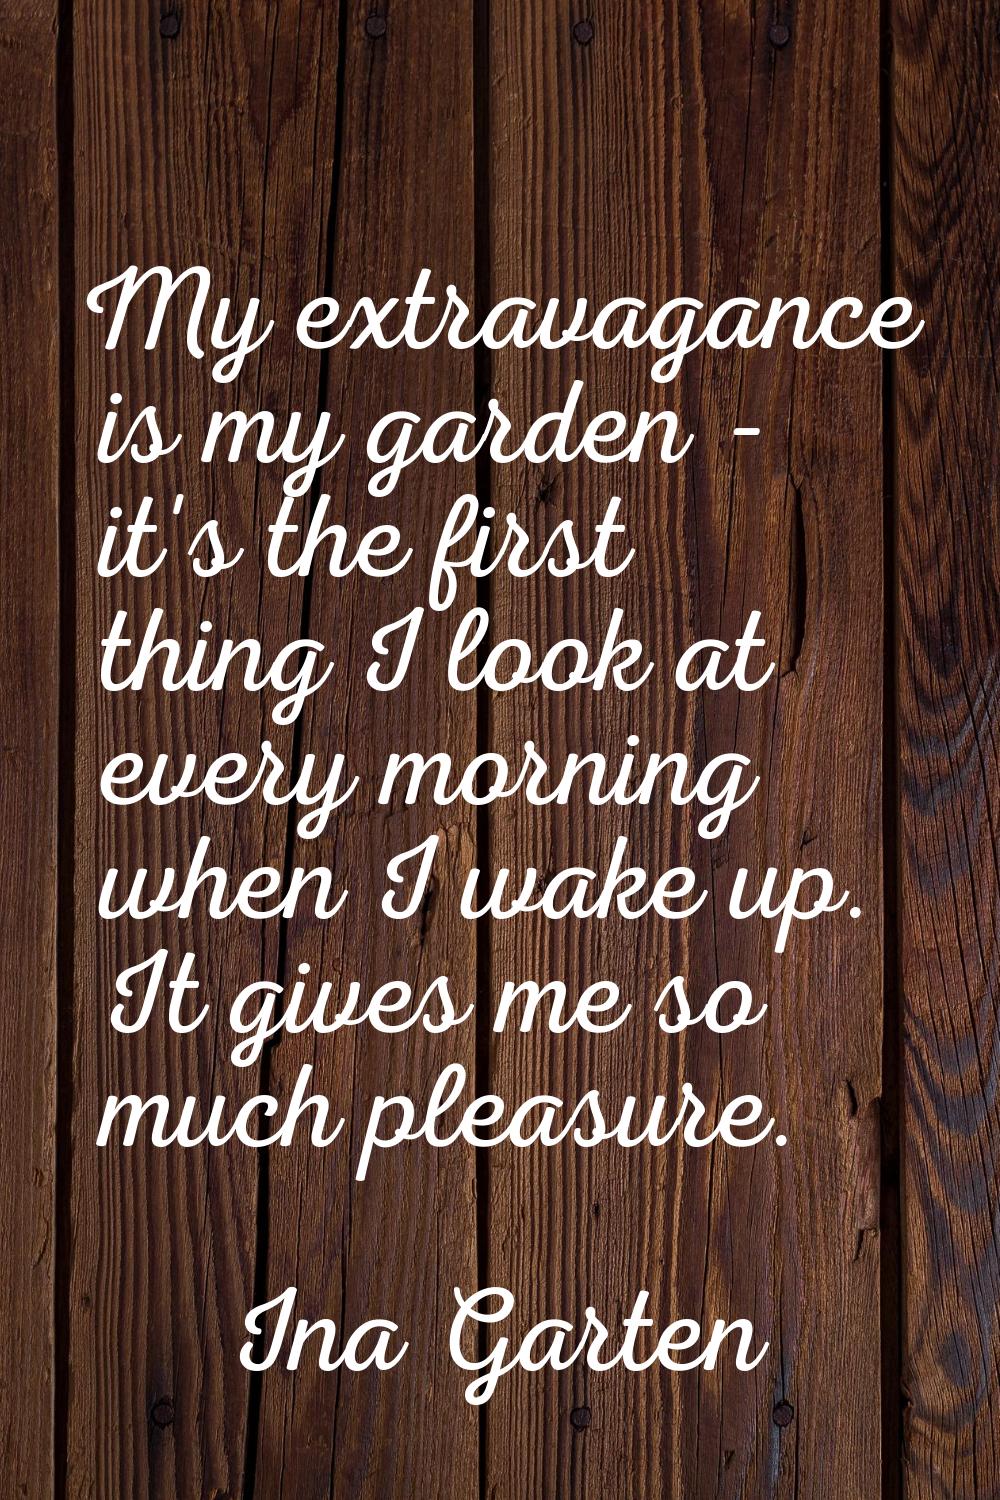 My extravagance is my garden - it's the first thing I look at every morning when I wake up. It give